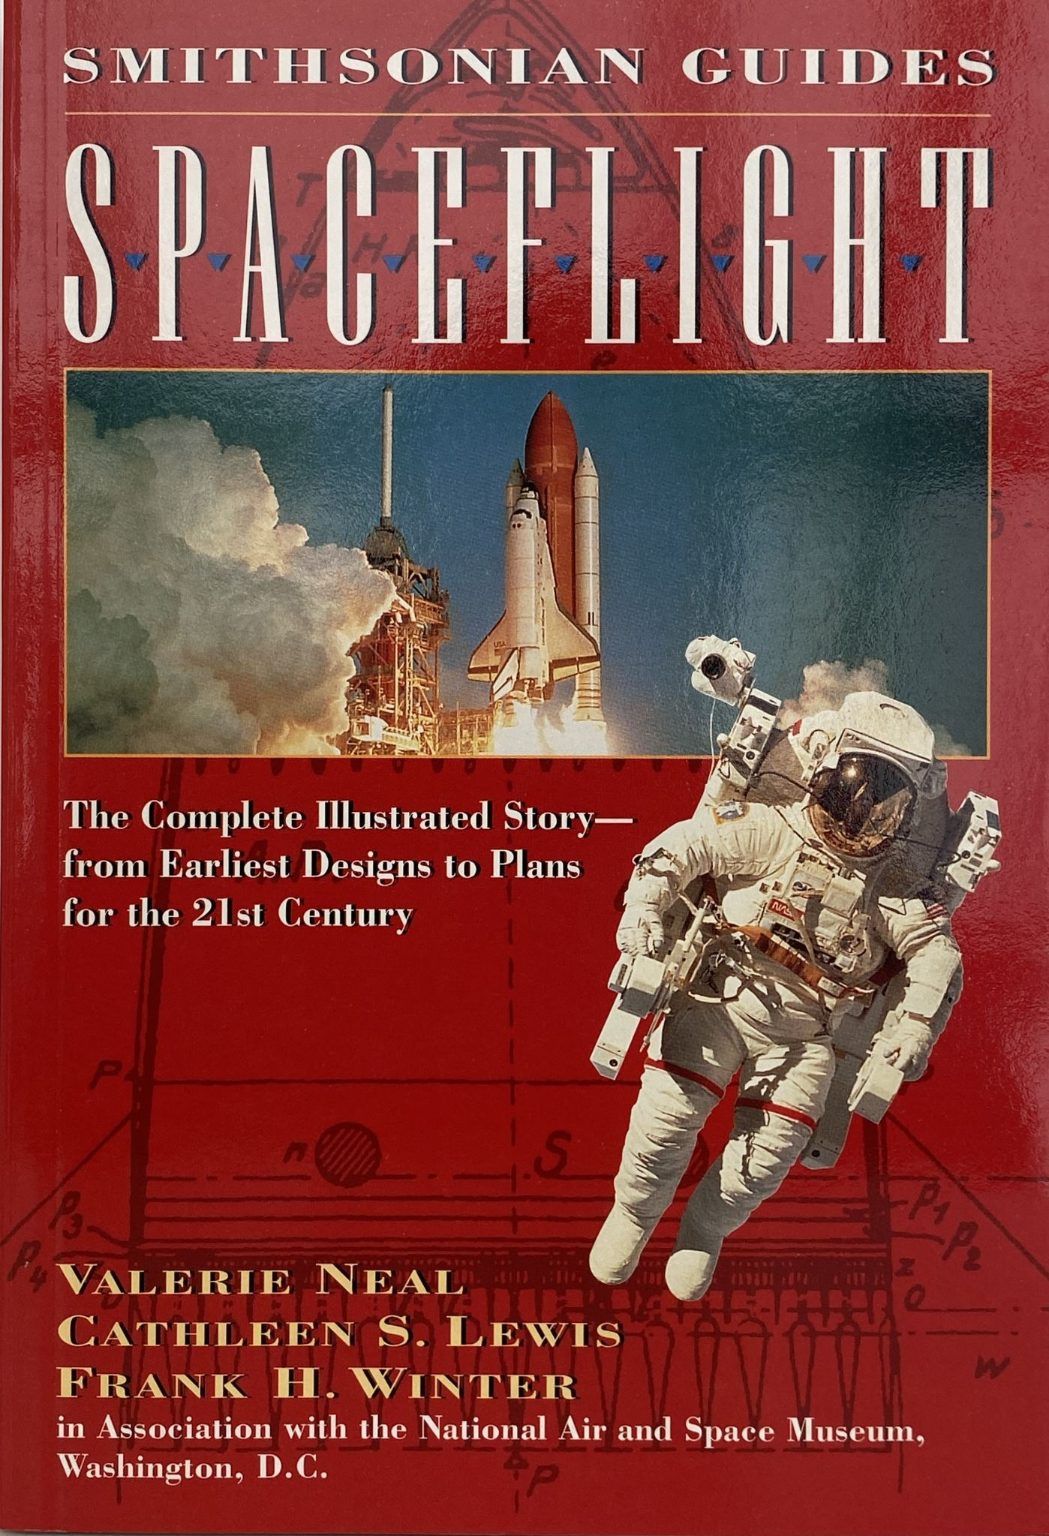 SMITHSONIAN GUIDES: Spaceflight